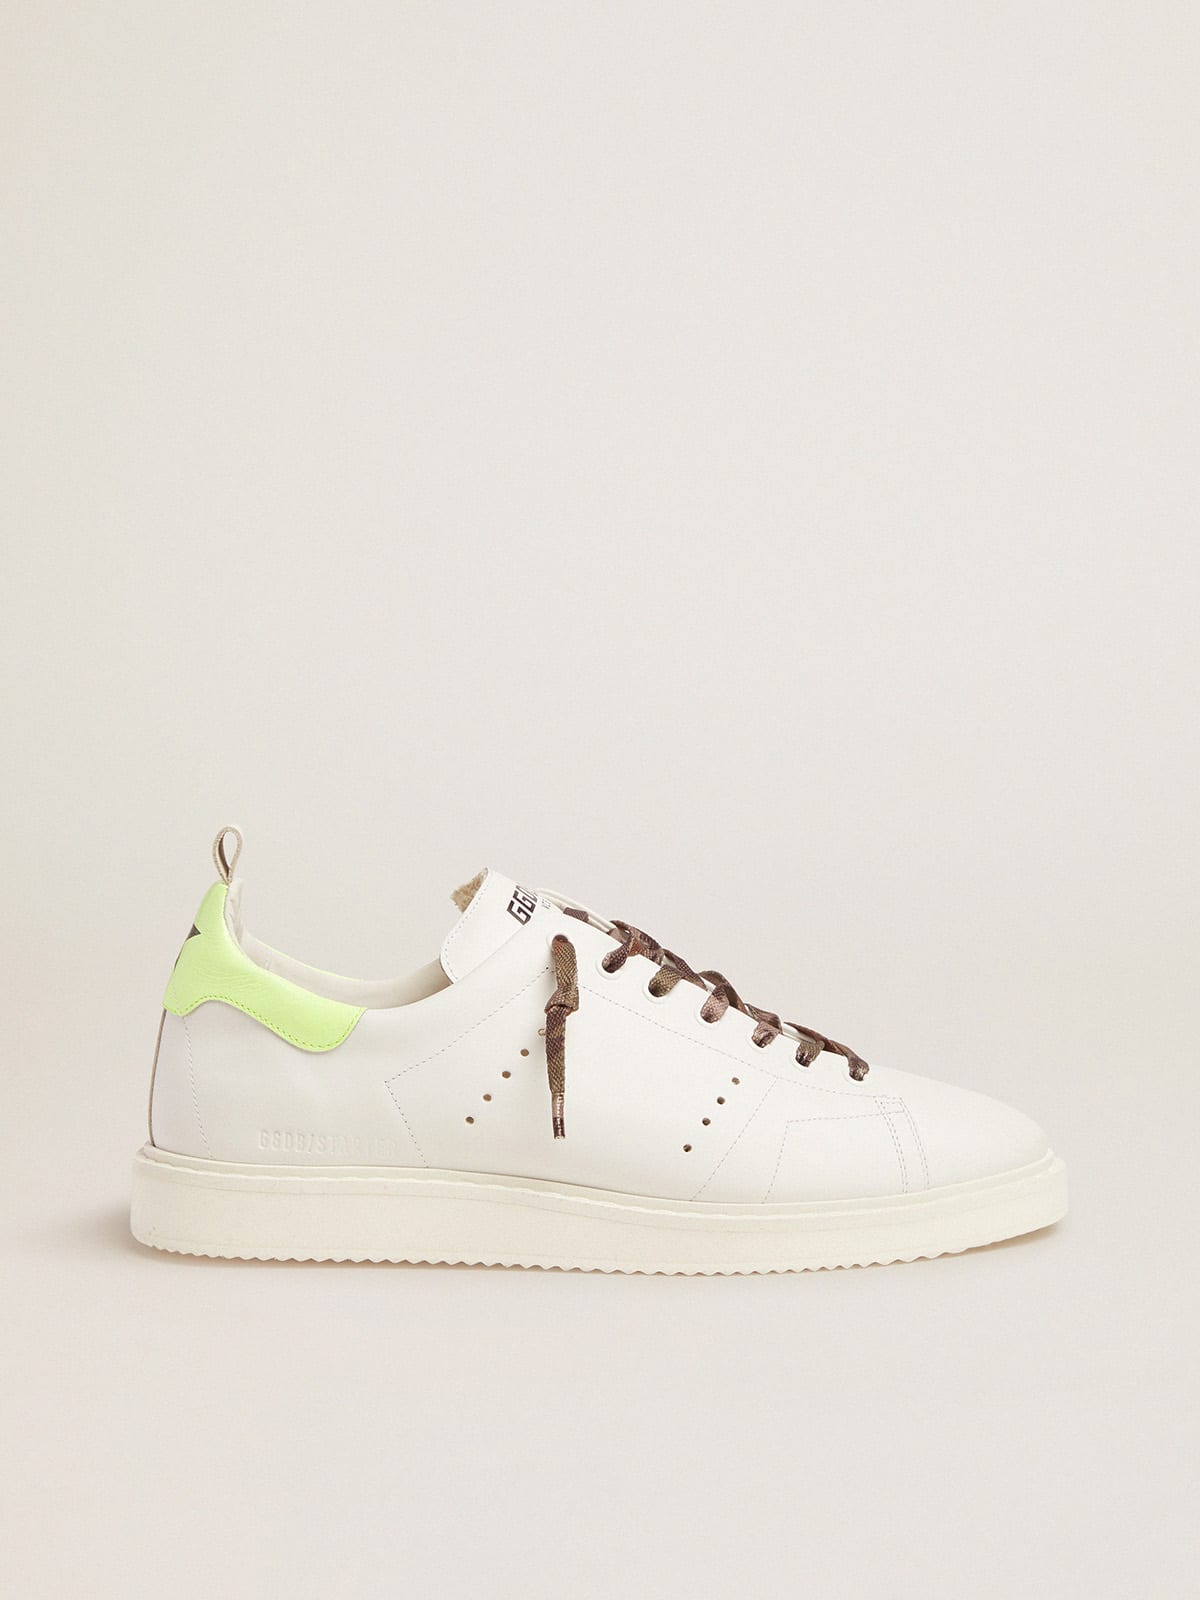 White Starter LTD sneakers with fluorescent yellow heel tab